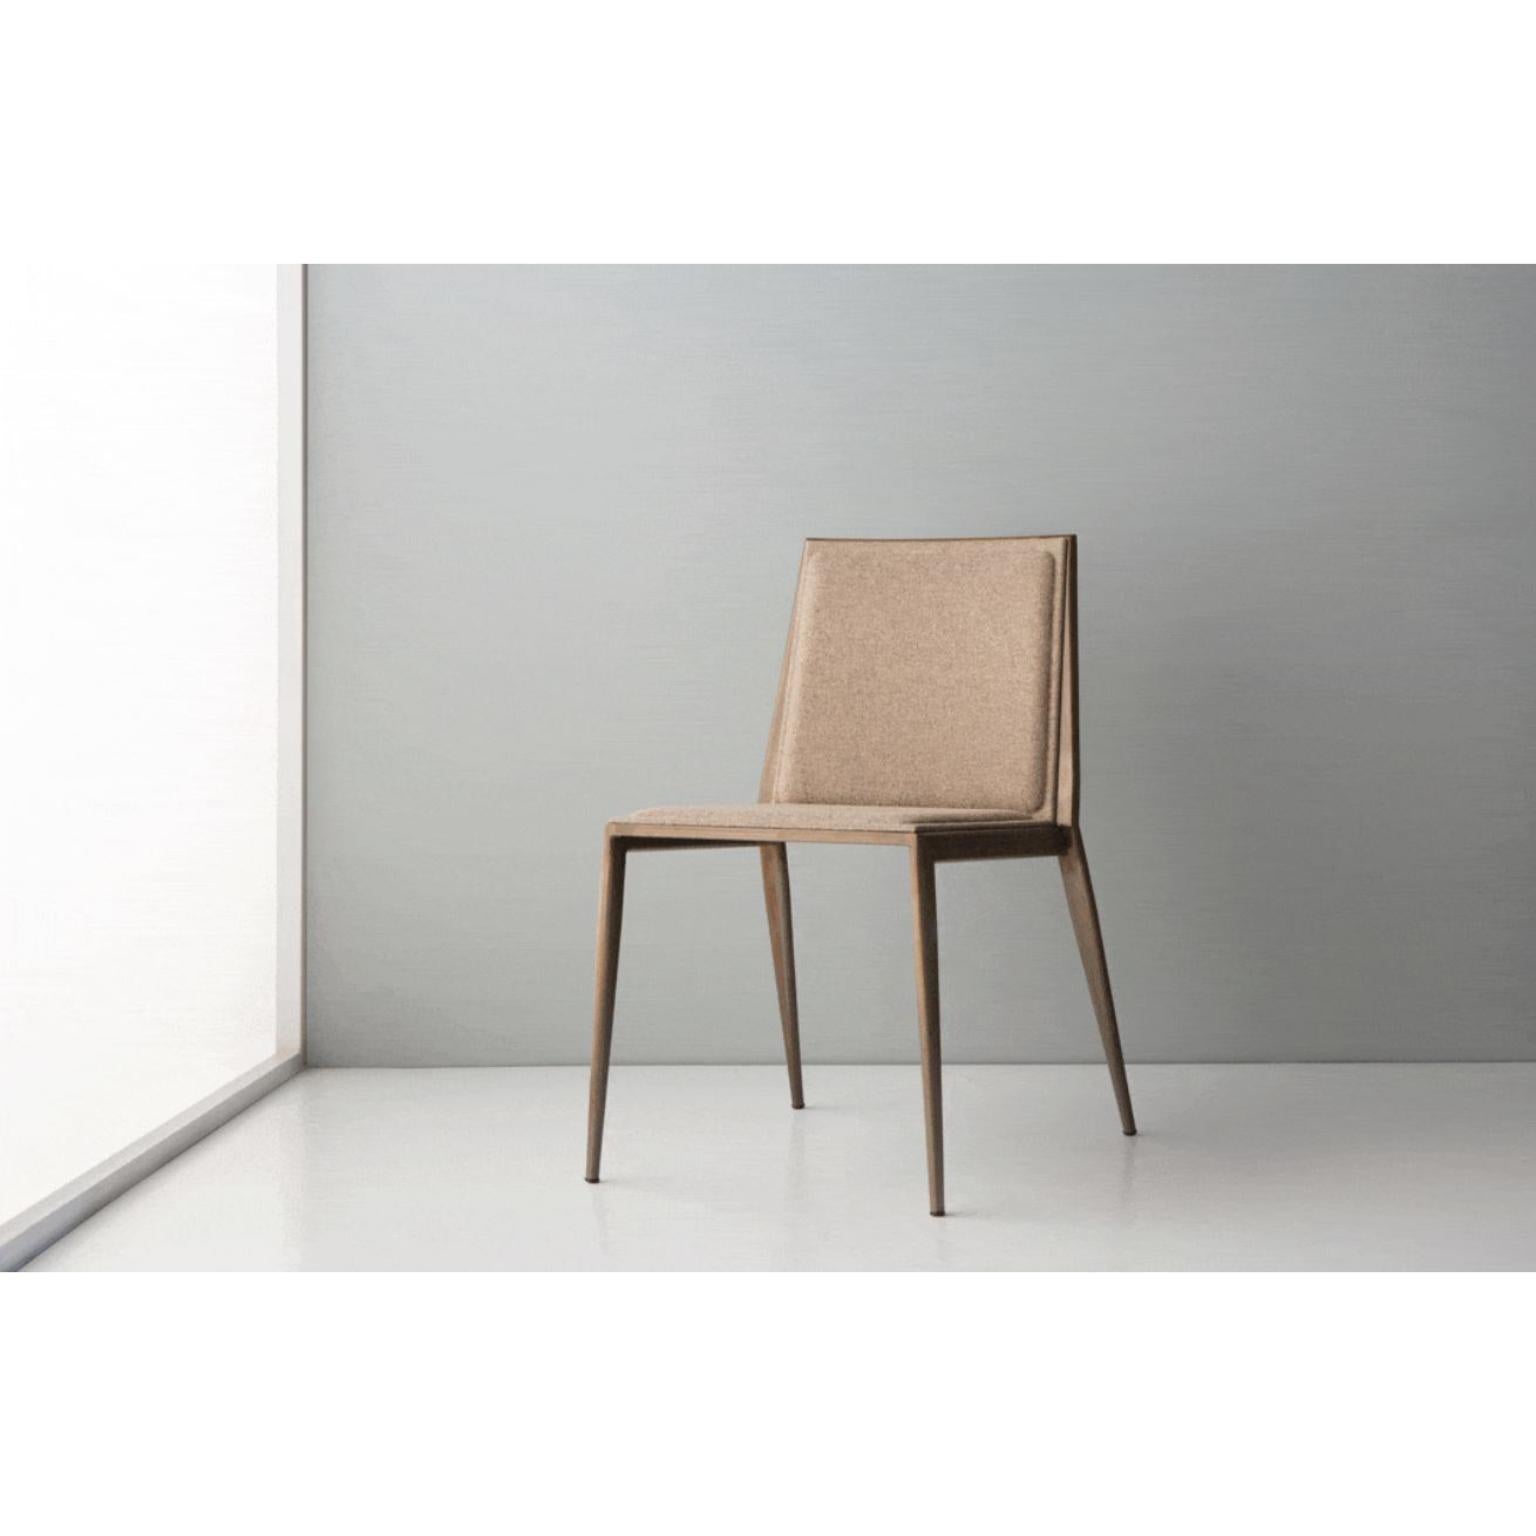 Haus Chair by Doimo Brasil
Dimensions: W 52 x D 58 x H 80 cm 
Materials: Veneer, Upholstered seat.


With the intention of providing good taste and personality, Doimo deciphers trends and follows the evolution of man and his space. To this end, it